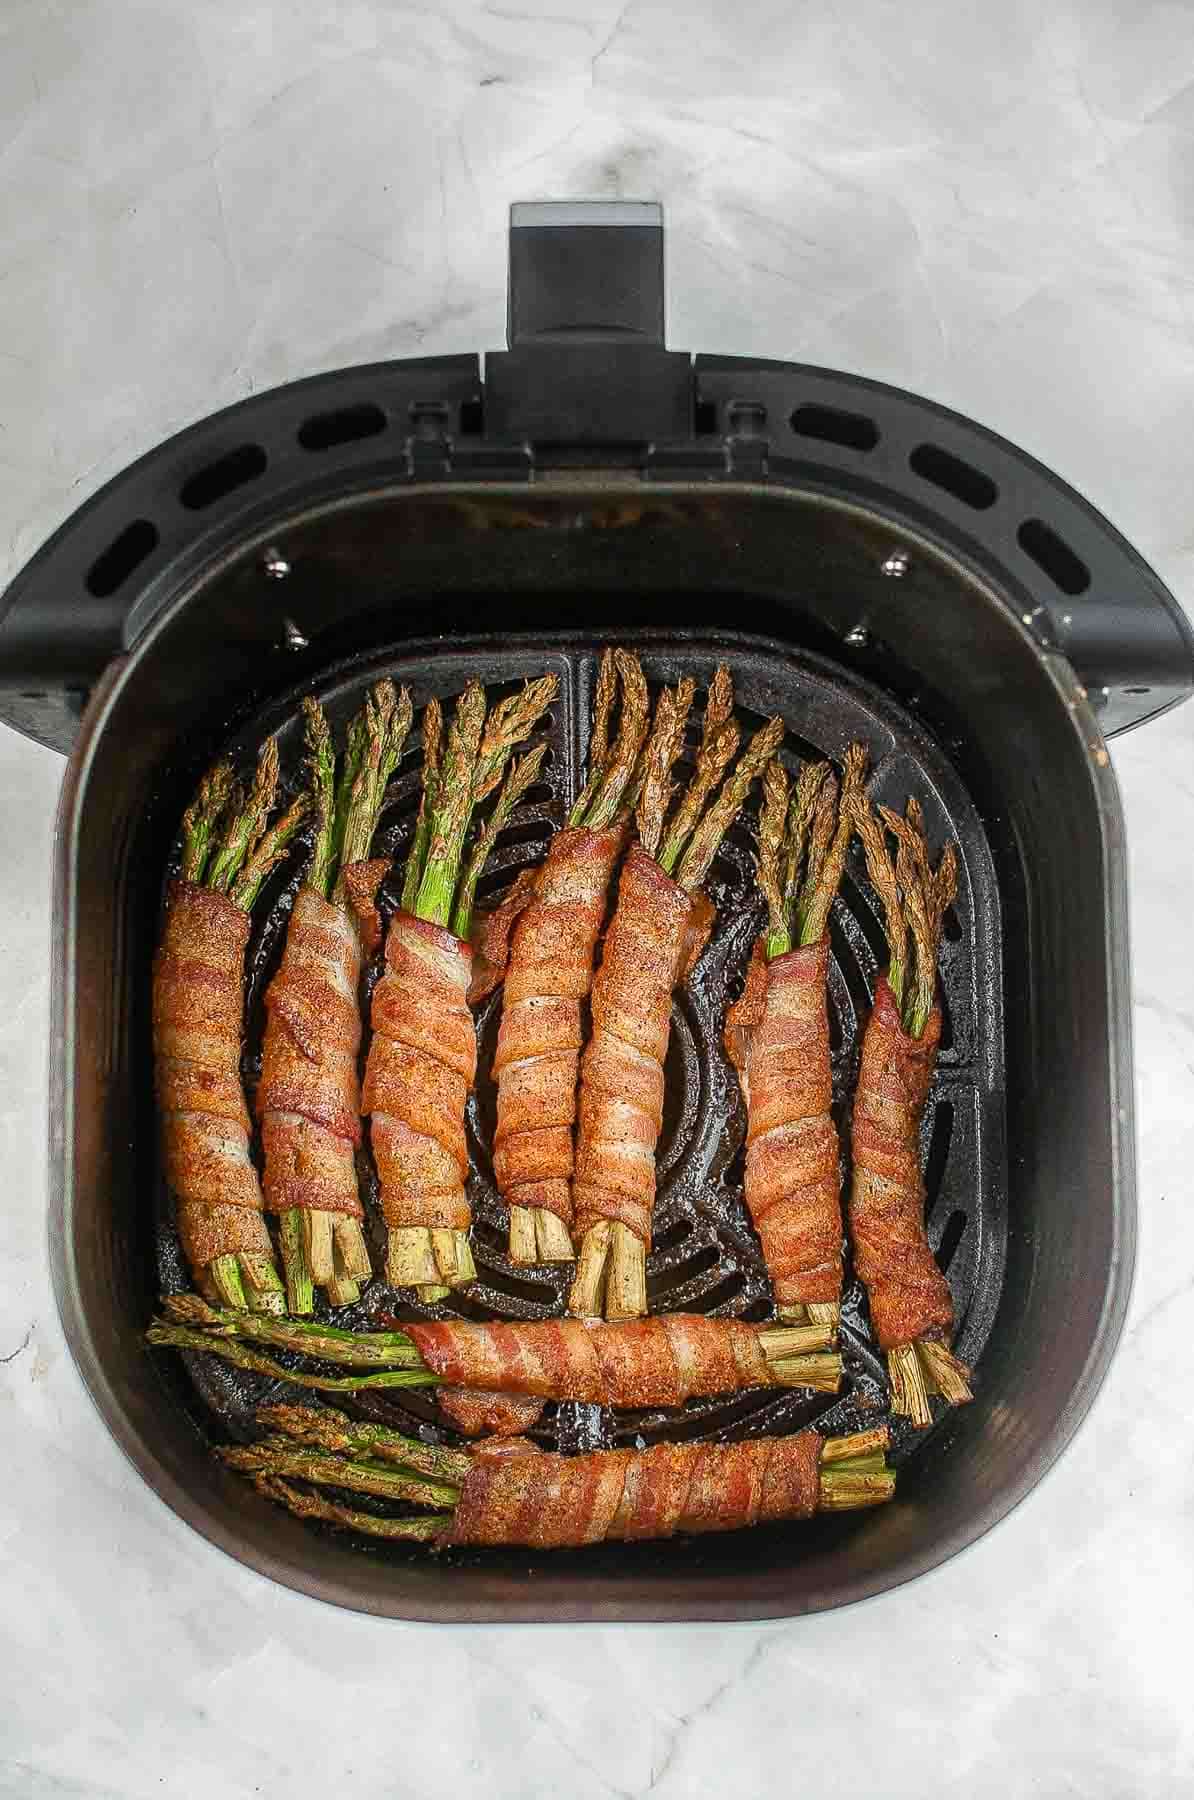 https://www.tosimplyinspire.com/wp-content/uploads/2023/01/Air-Fryer-Bacon-Wrapped-Asparagus-6.jpg